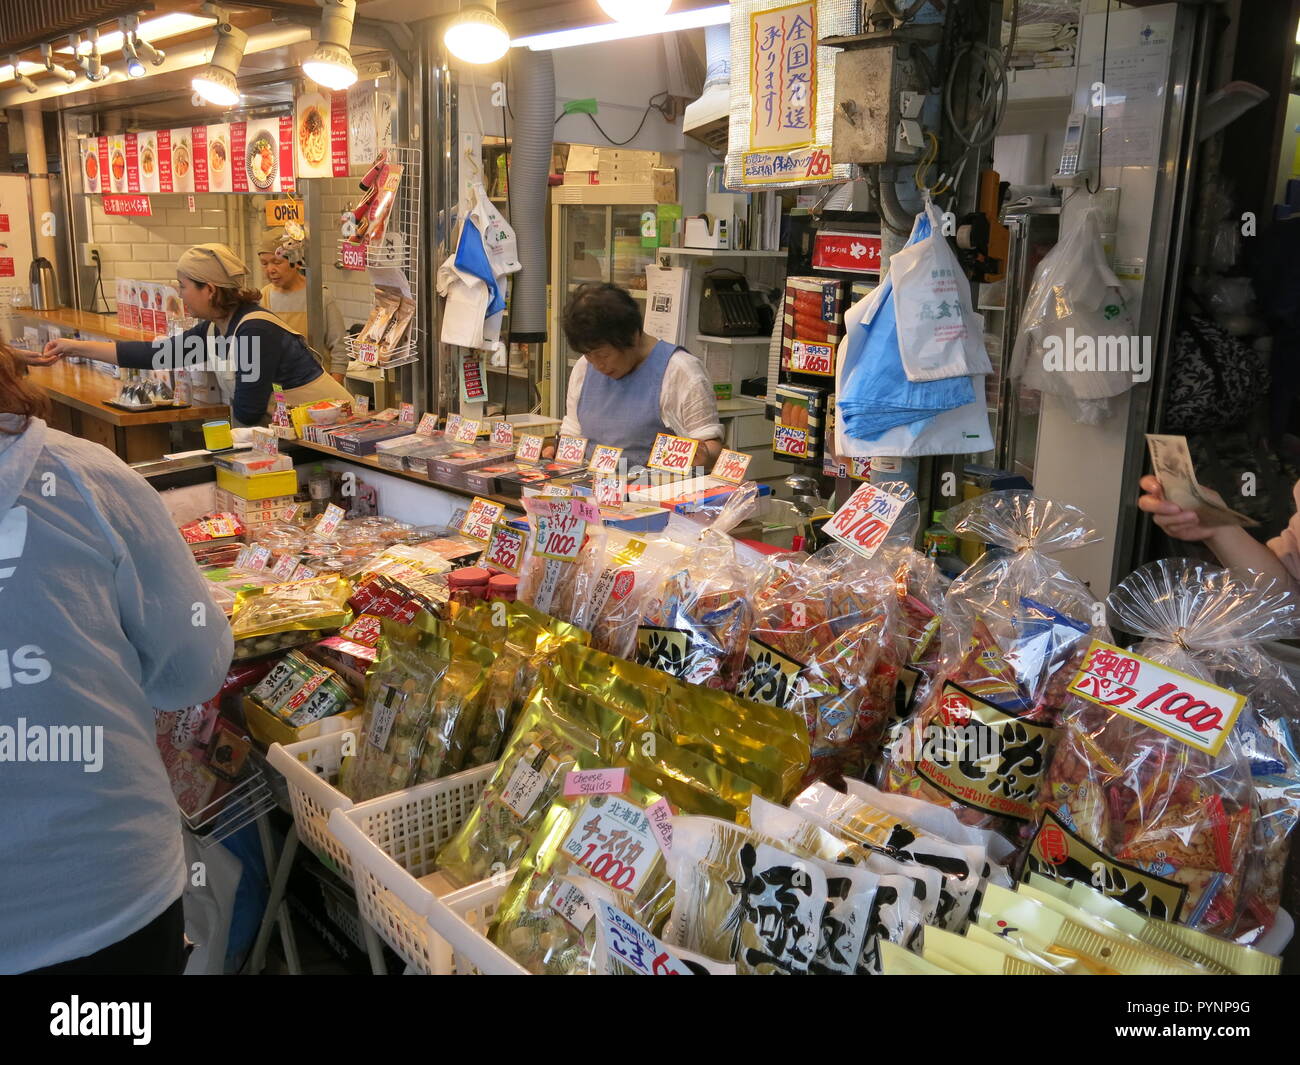 Street scene of a Japanese food market in central Tokyo Stock Photo